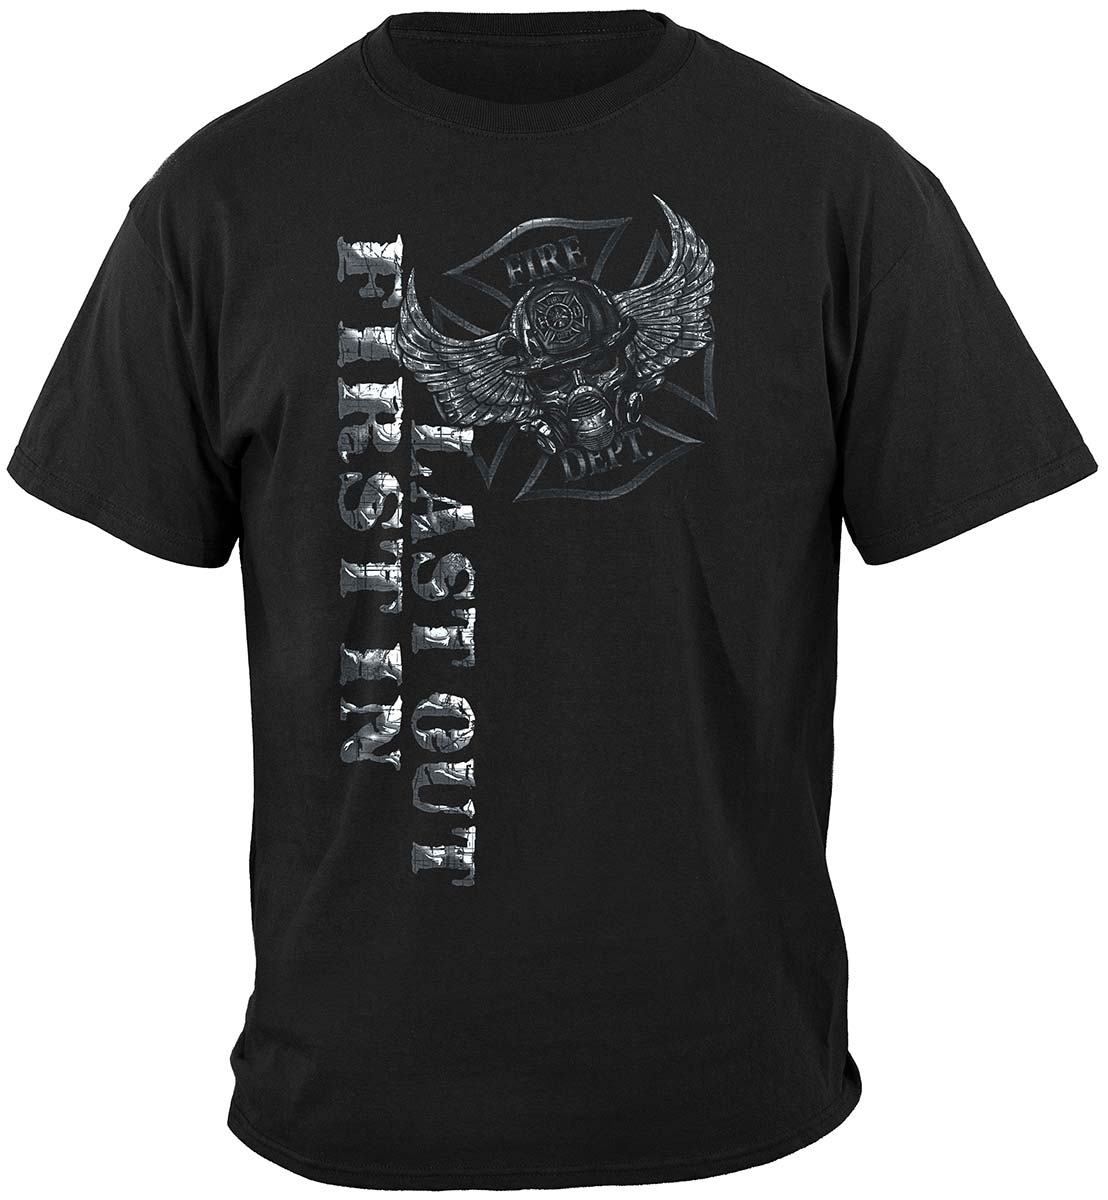 Steel Fire Wings With Foil Stamp Premium T-Shirt